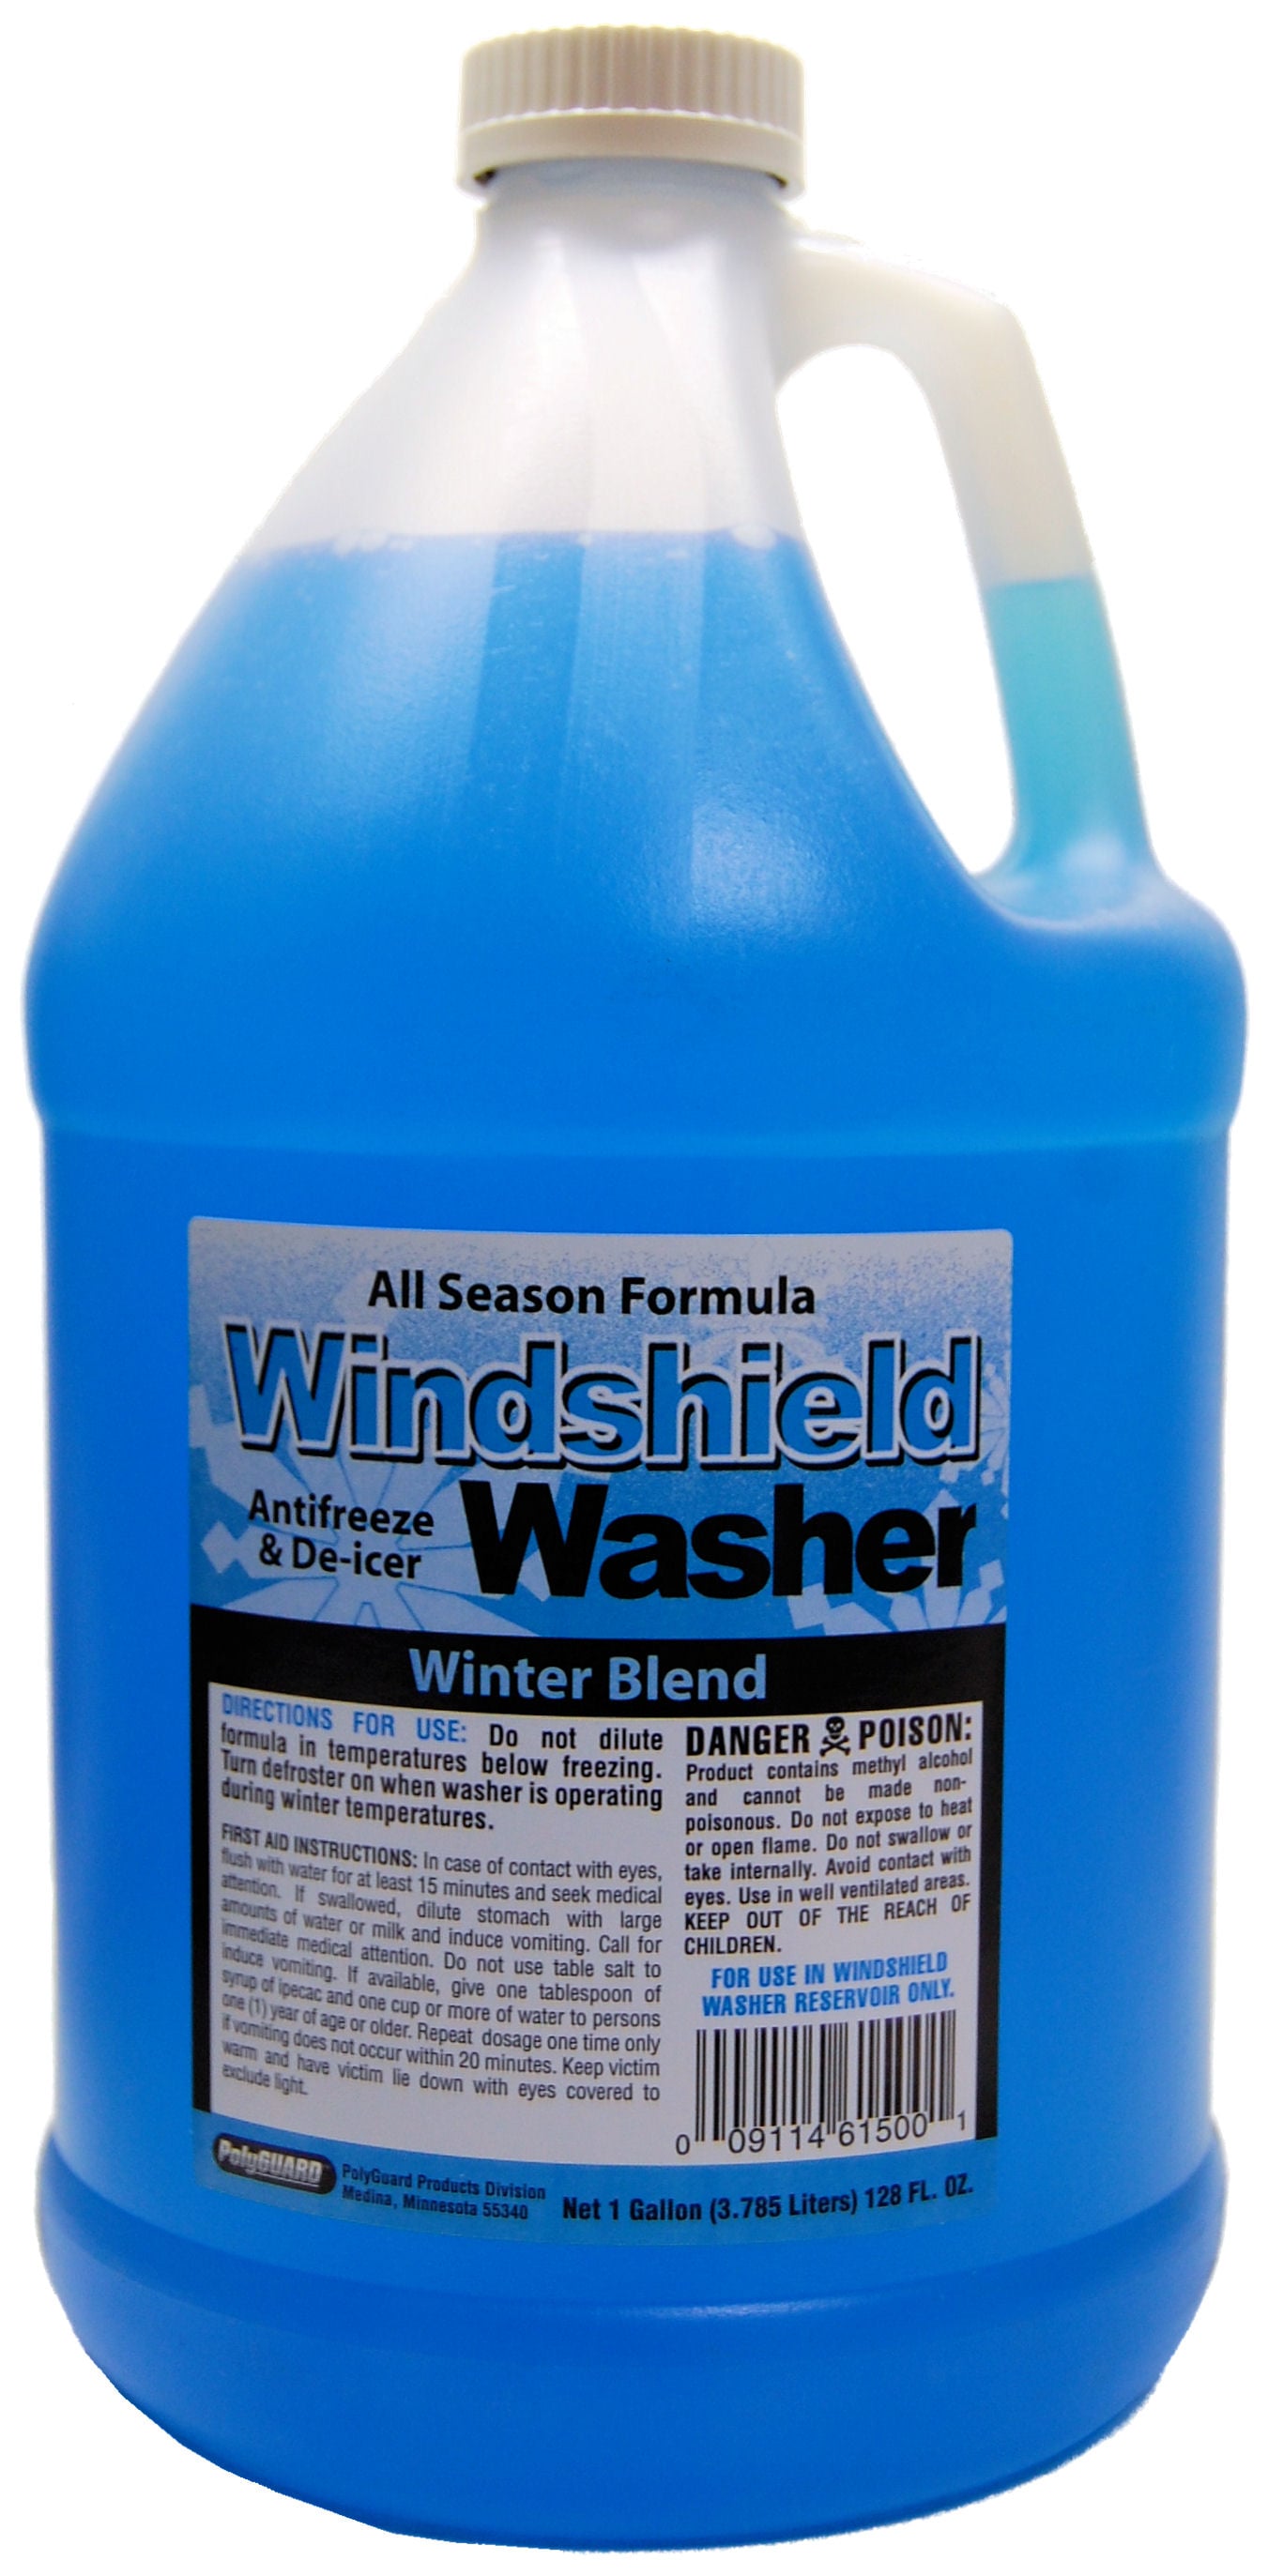 Zecol 1-Gallon De-Icer Windshield Washer Fluid at